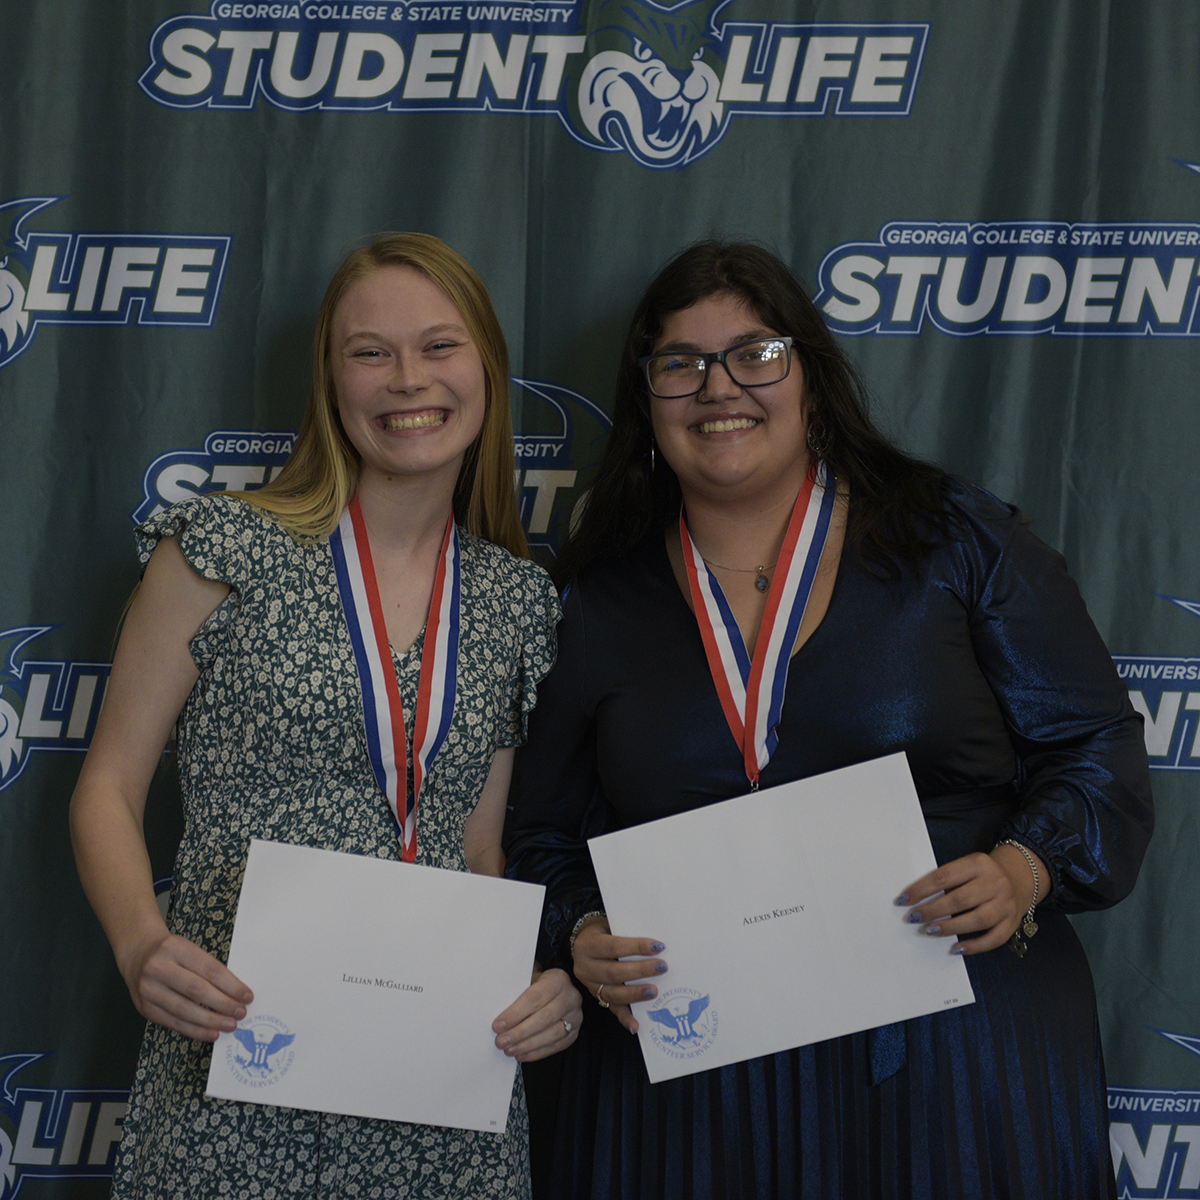 Winners of the President's Volunteer Service Silver Awards from left to right are: Lillian McGalliard and Alexis Keeney.